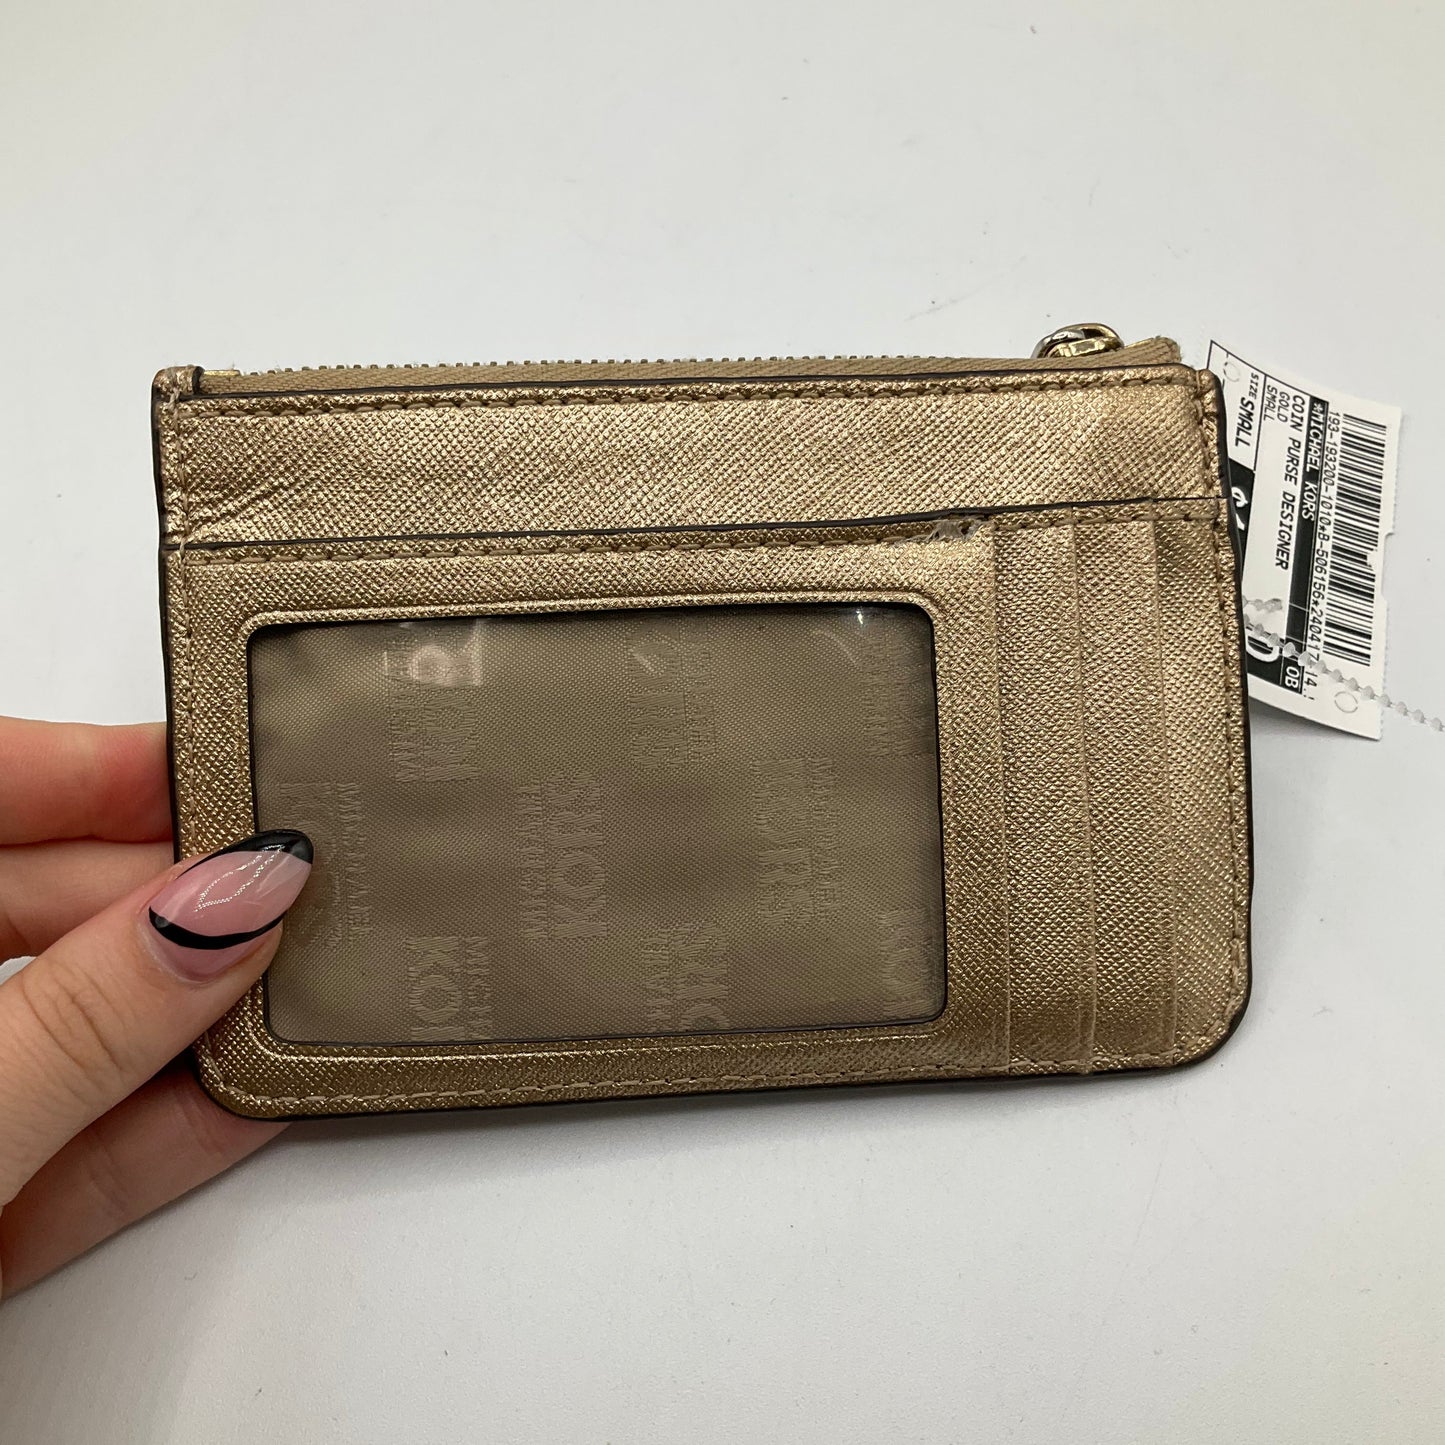 Coin Purse Designer By Michael Kors  Size: Small